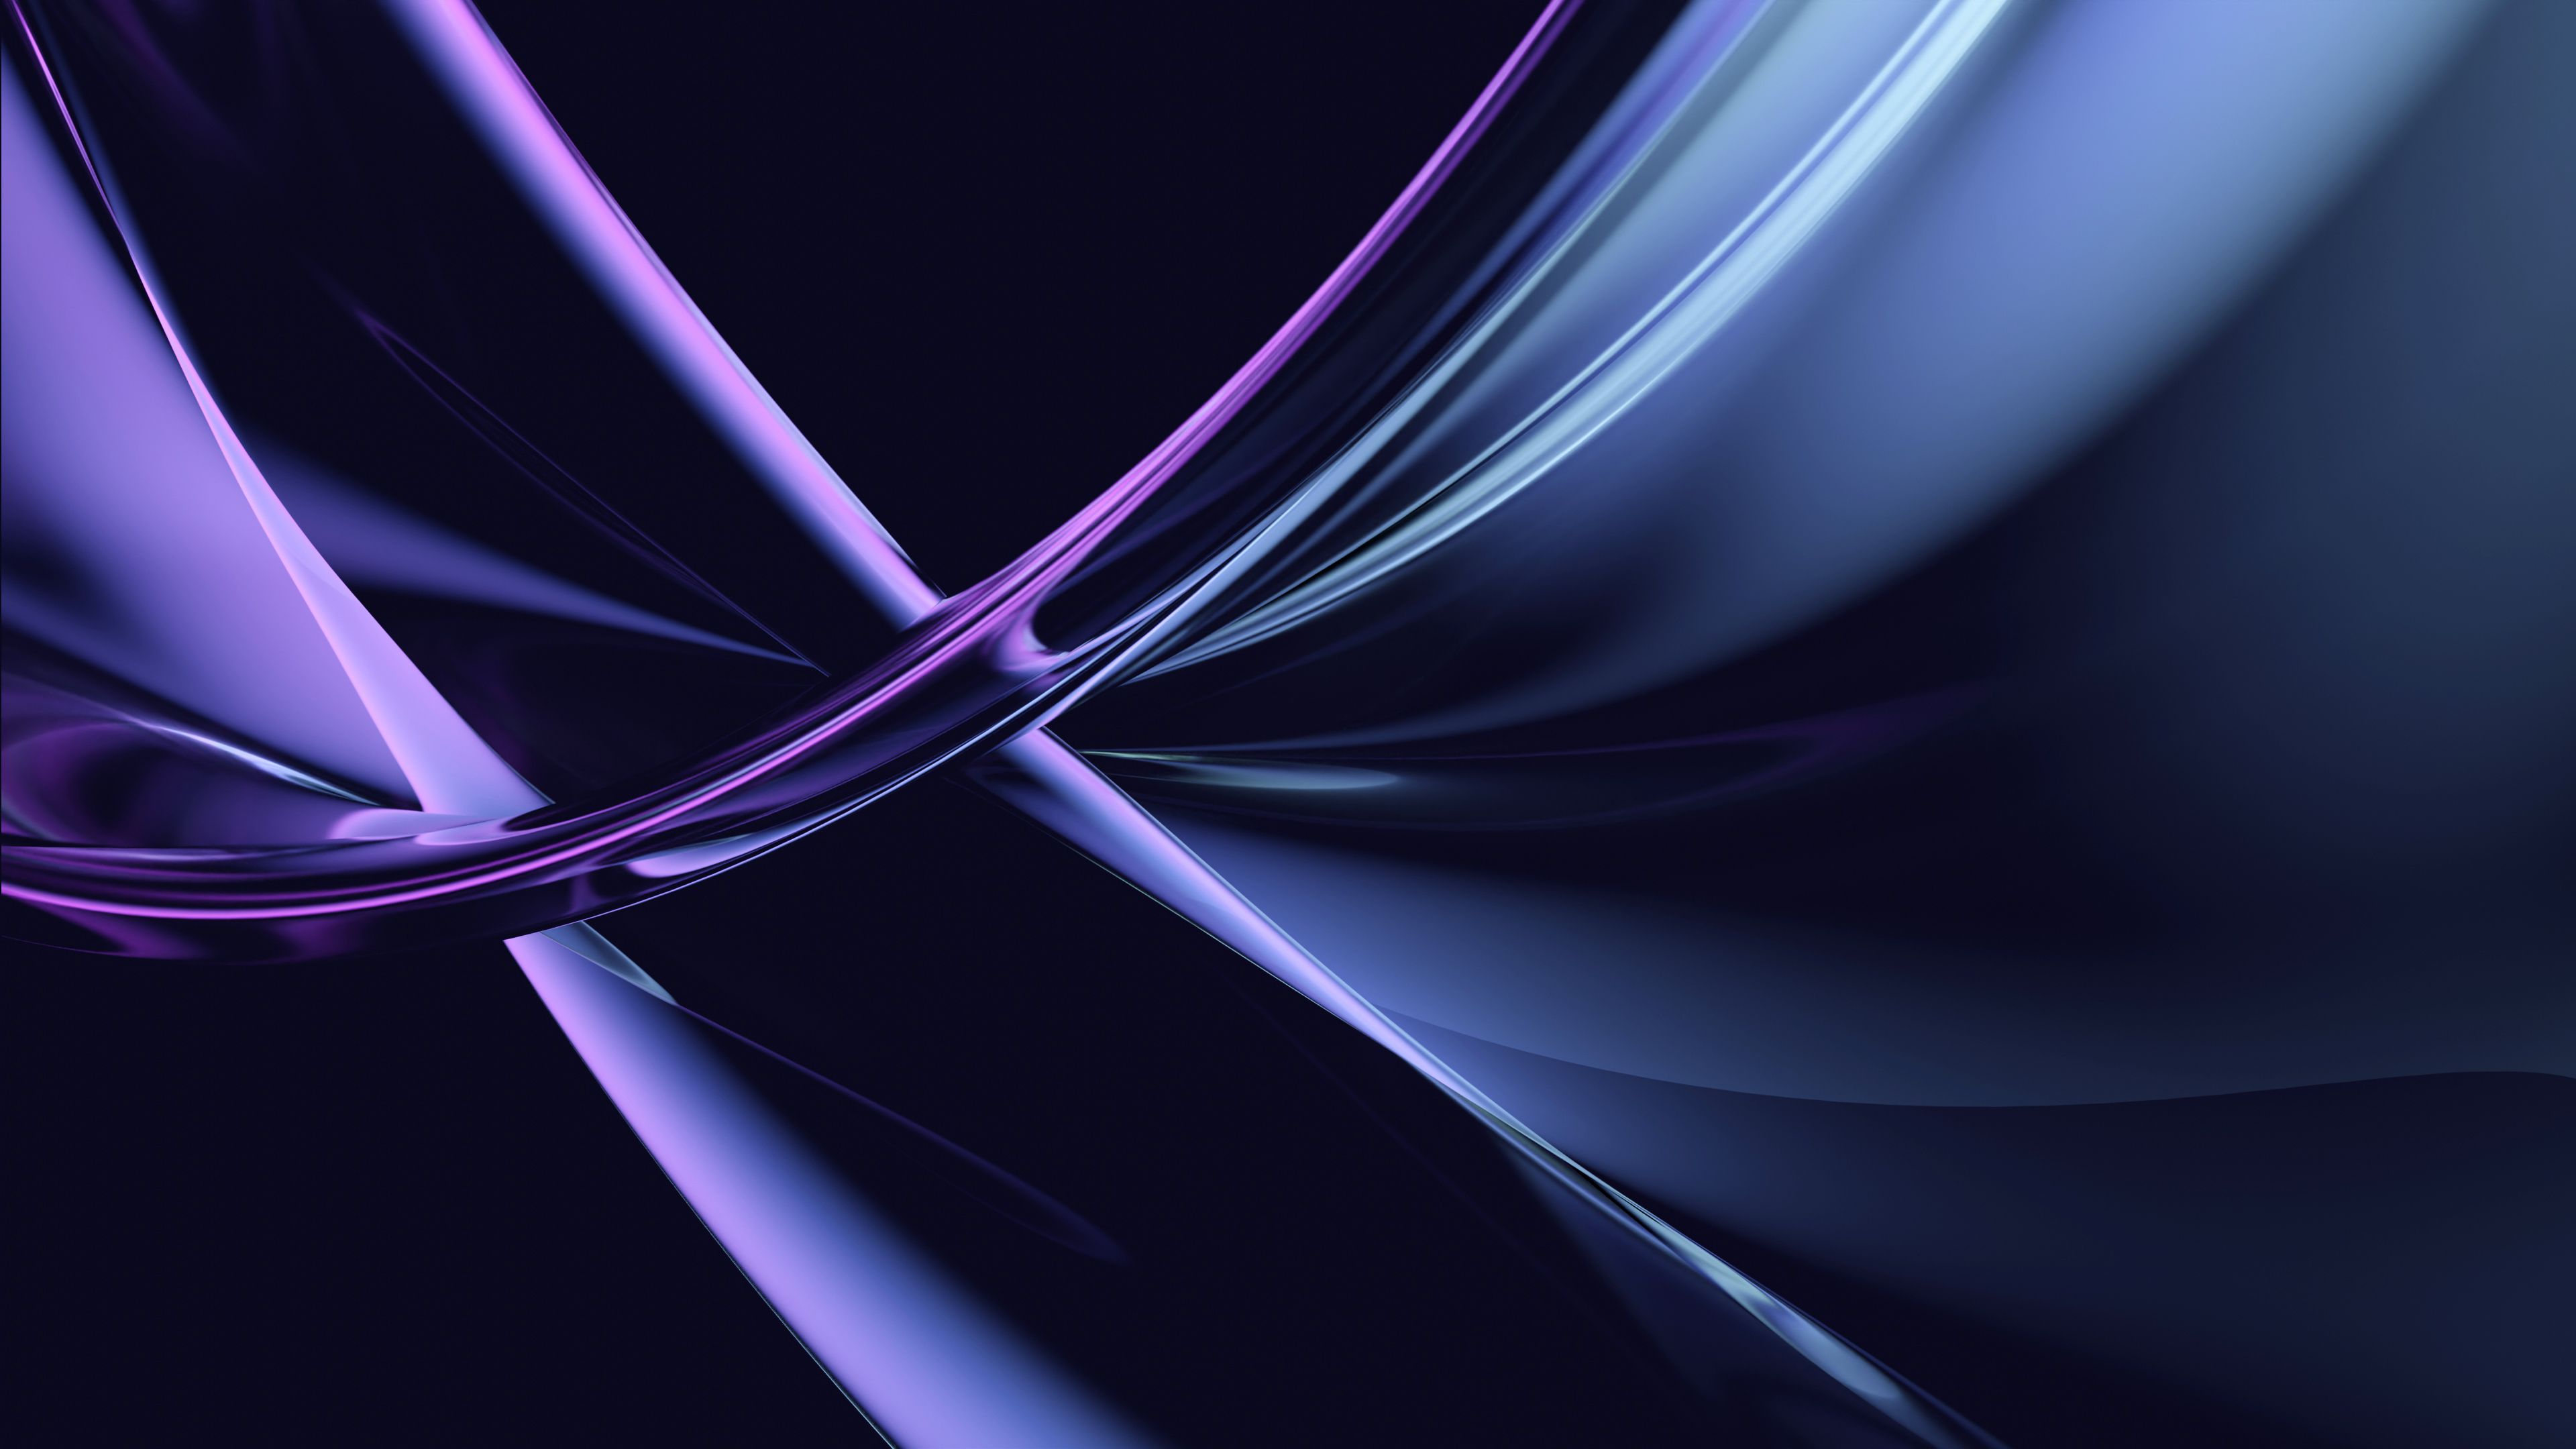 A purple and blue abstract image - Glossy